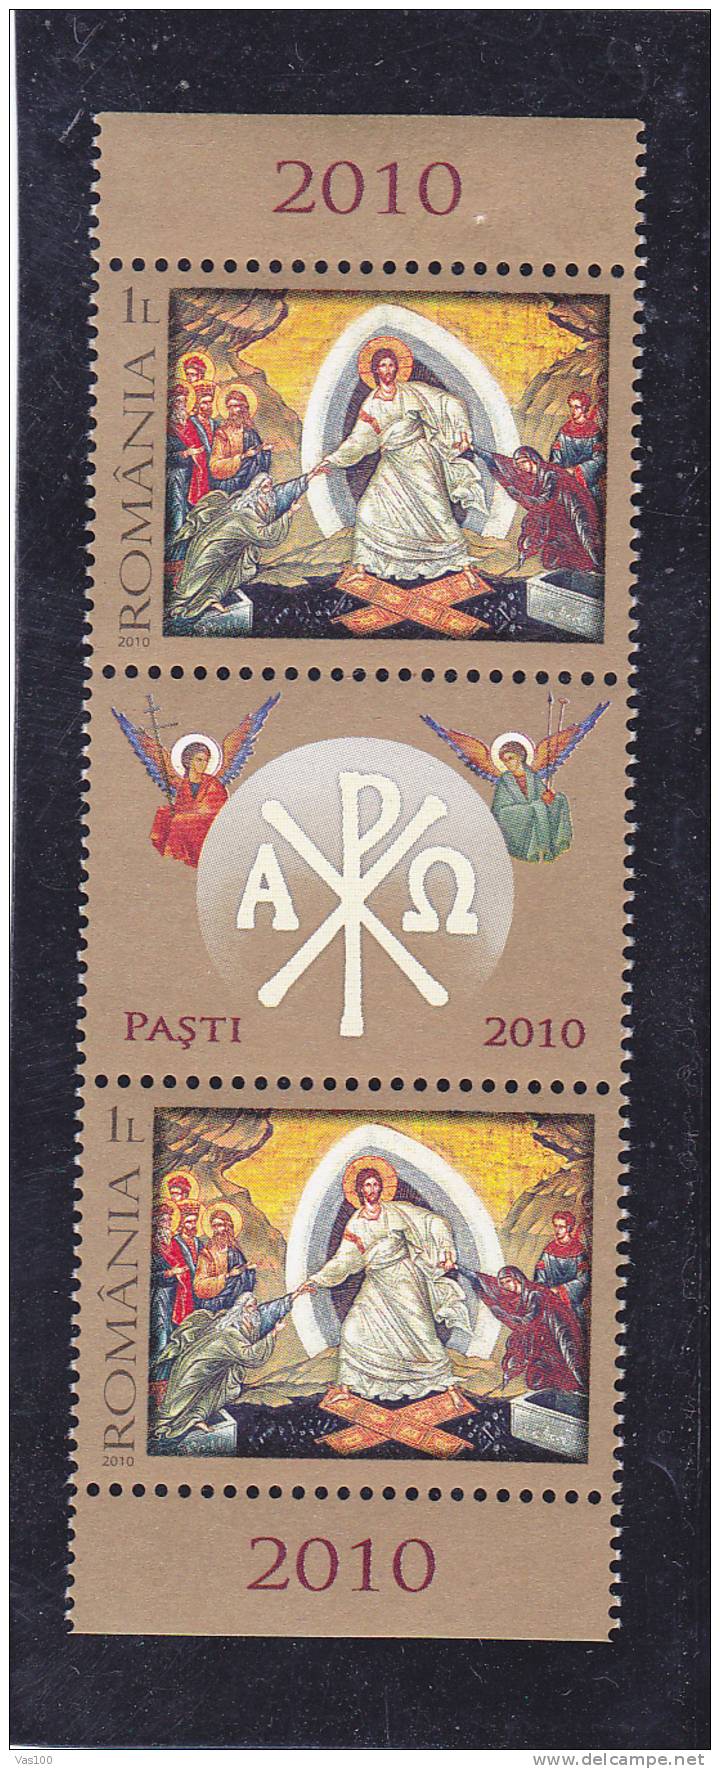 Easter,Pâques , 2010 MNH ** Stamps In Pair + Labels !,Romania. - Easter